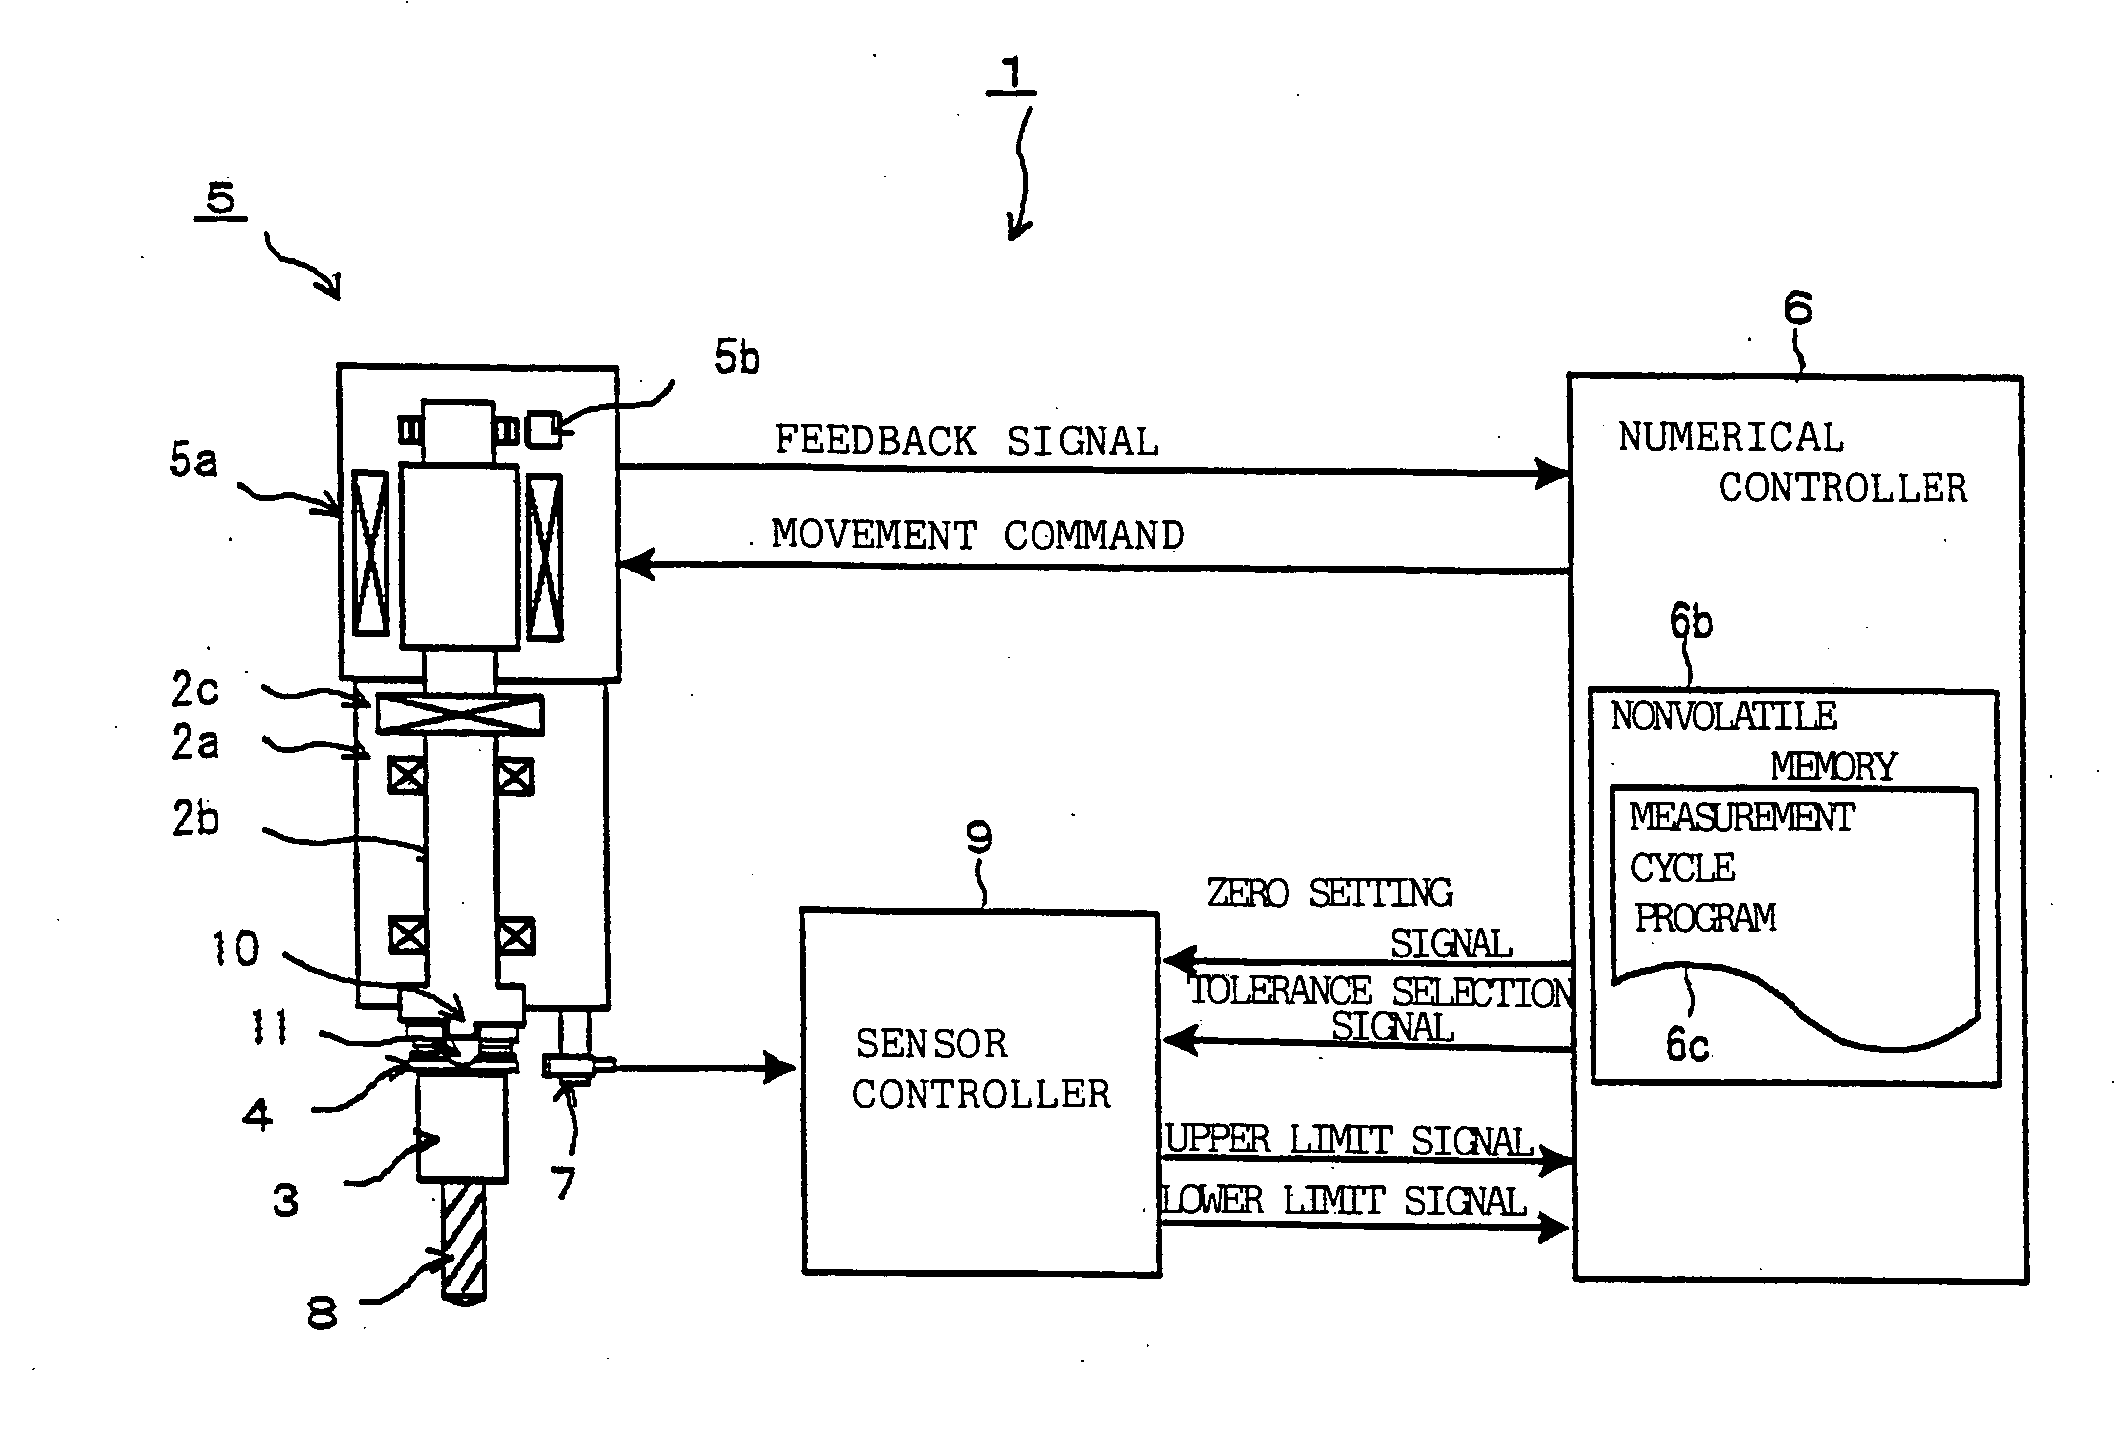 Numerically controlled machine tool